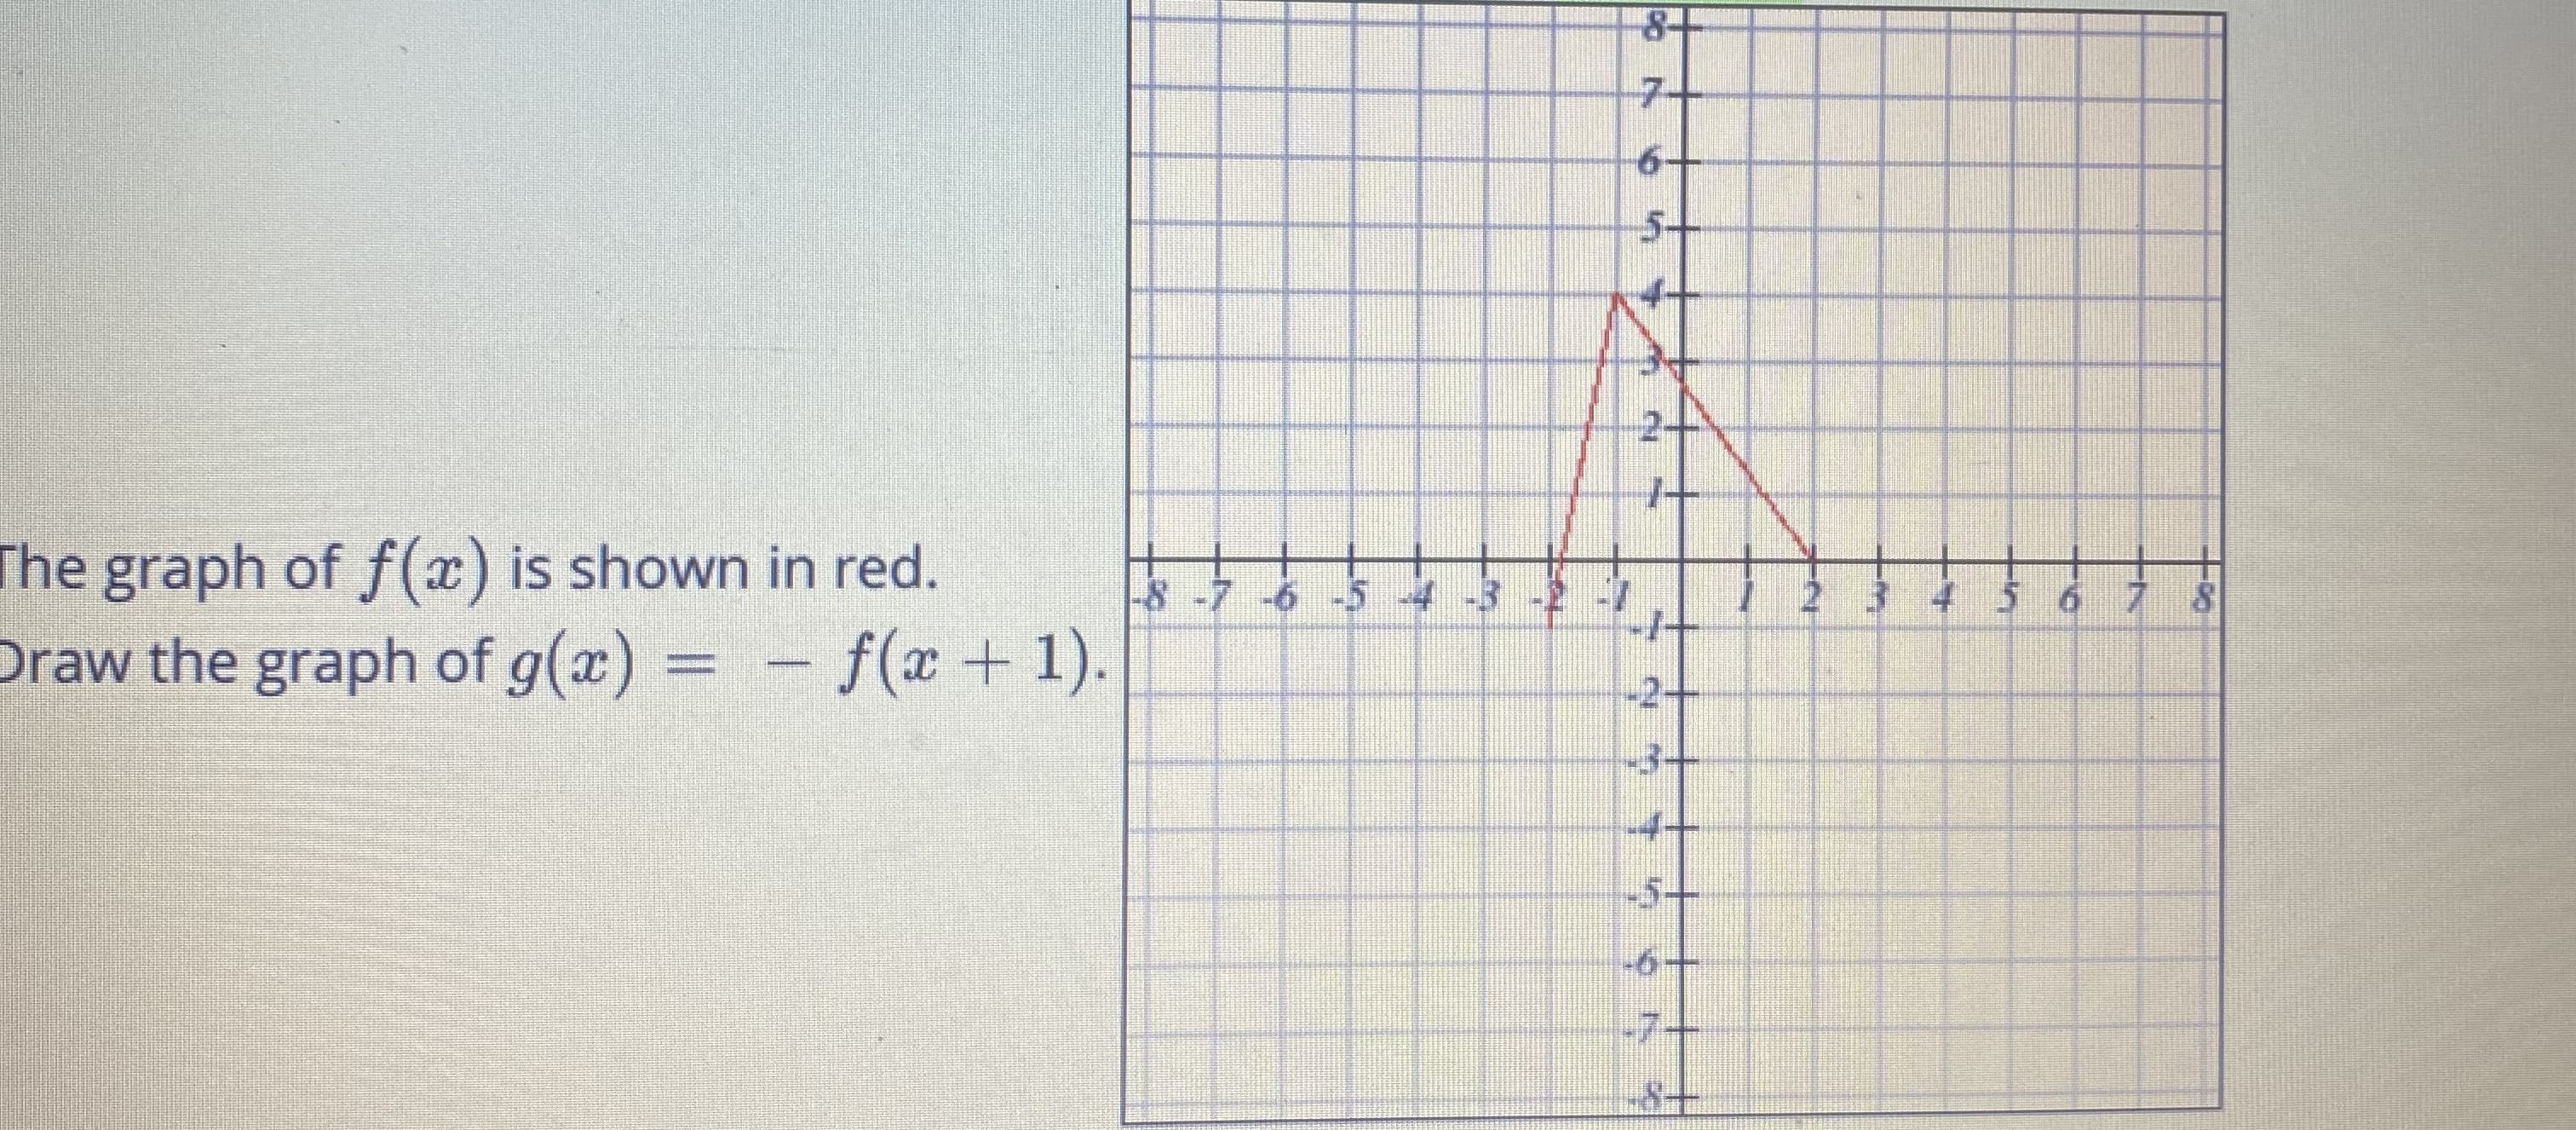 6-
5+
The graph of f(x) is shown in red.
Draw the graph of g(x) = - f(x + 1).
8-7-6 -5 43
2 3 4 56 7 8
-2+
-4+
-5-
-7-
